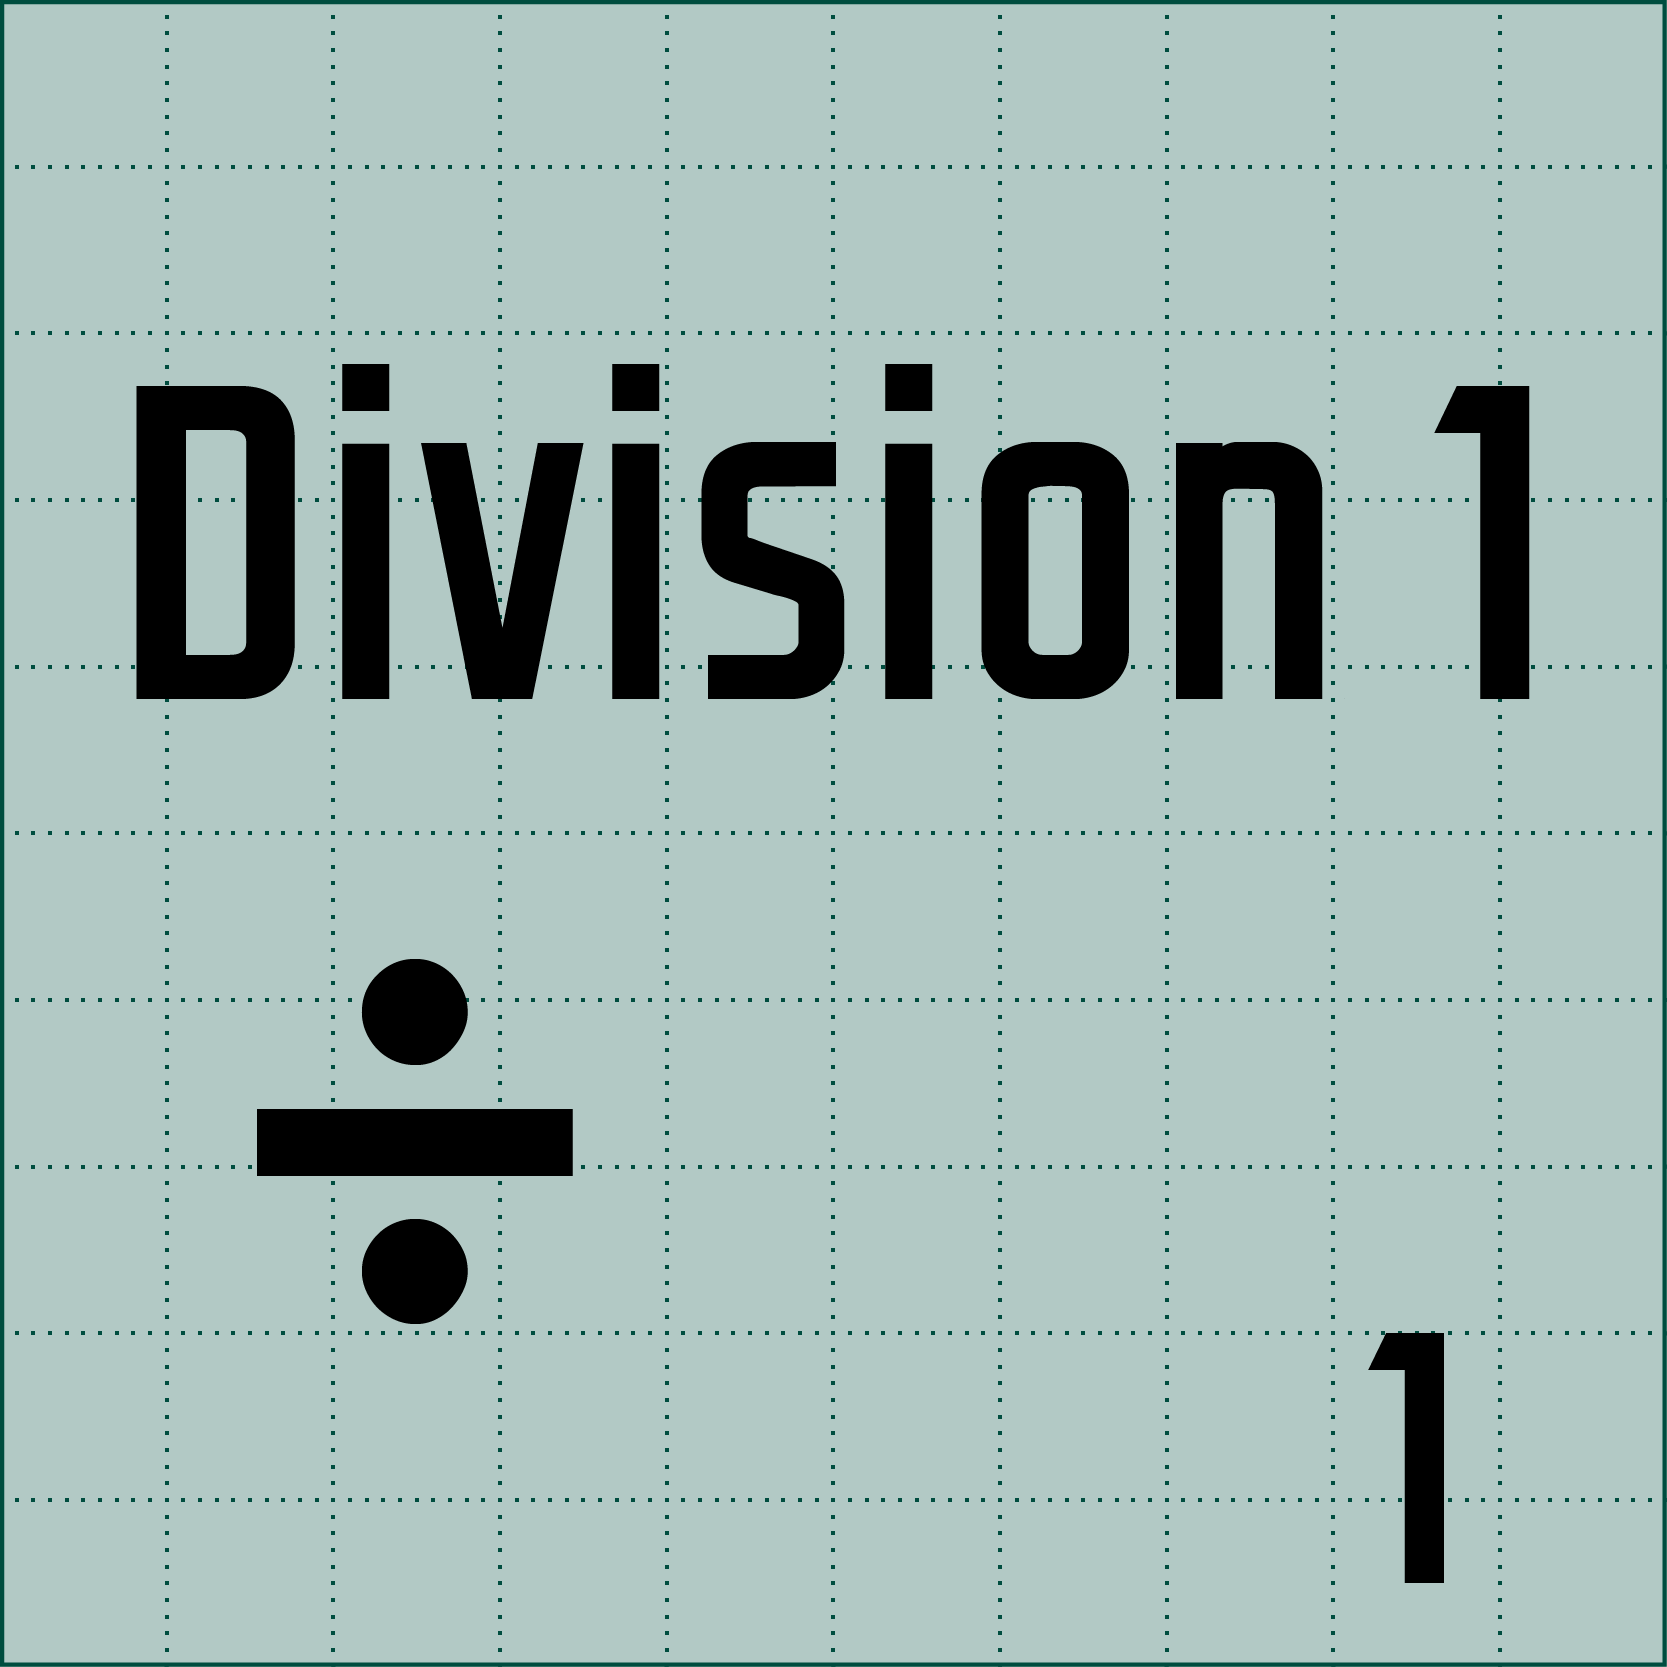 cell division - Year 2 - Quizizz